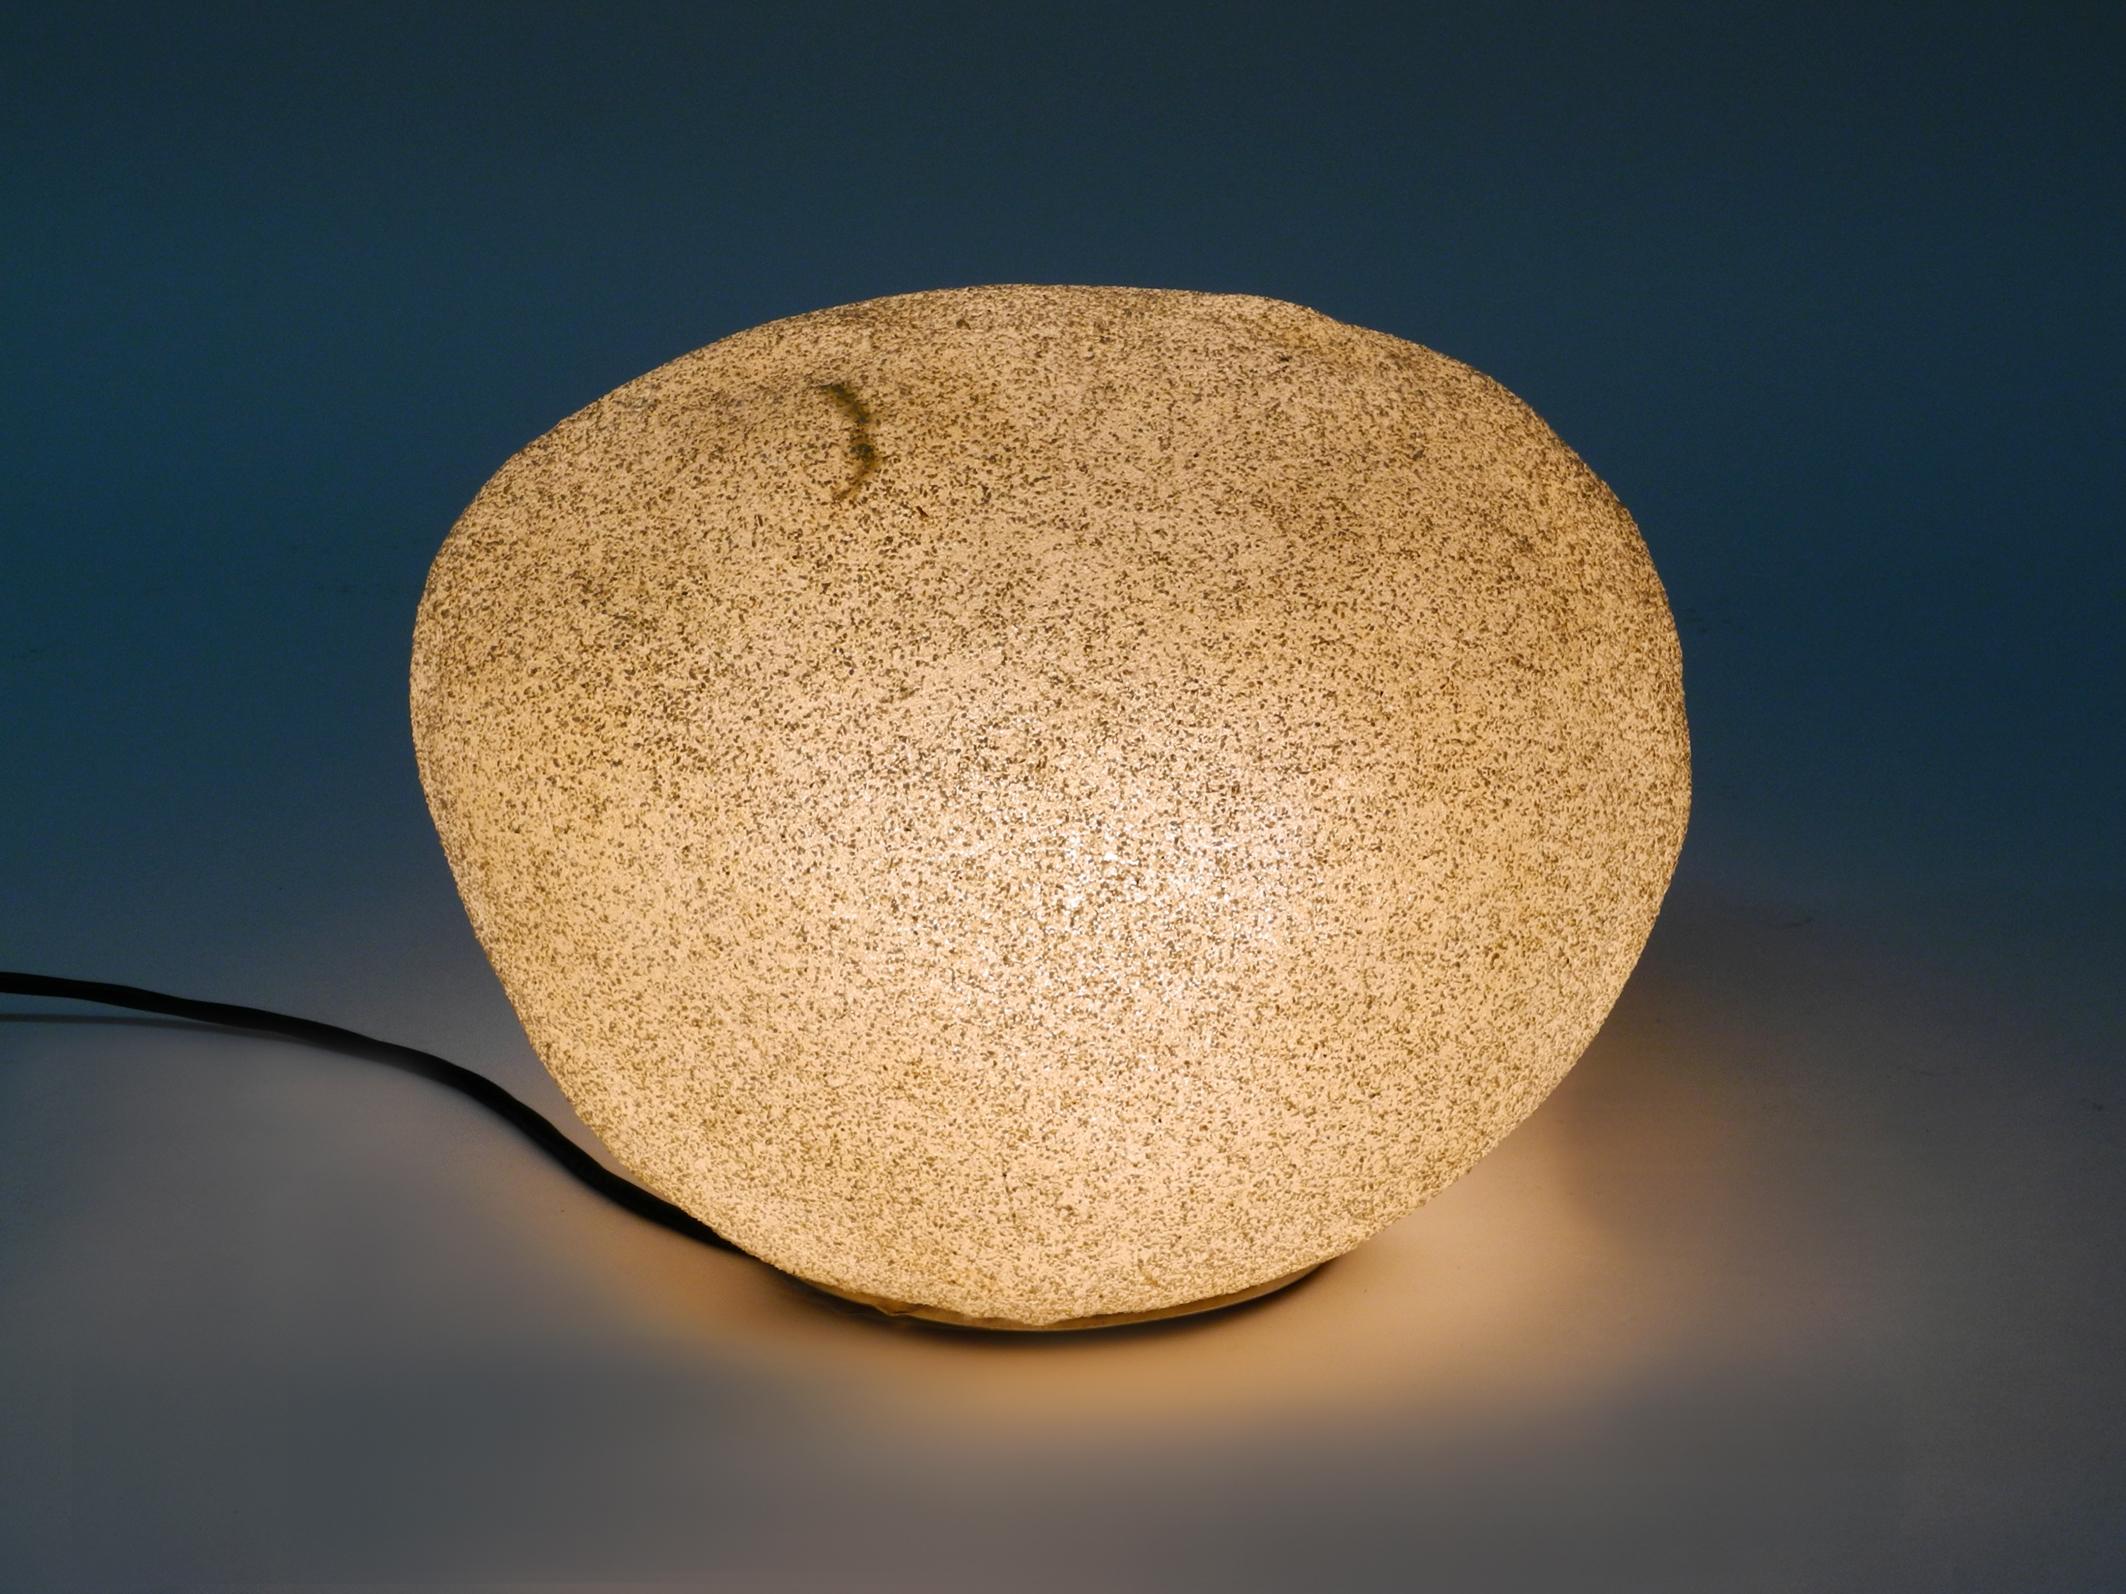 Mid-20th Century XL Tecta 1960s Floor Lamp Made of Fiberglass in the Shape of a Stone or Rock